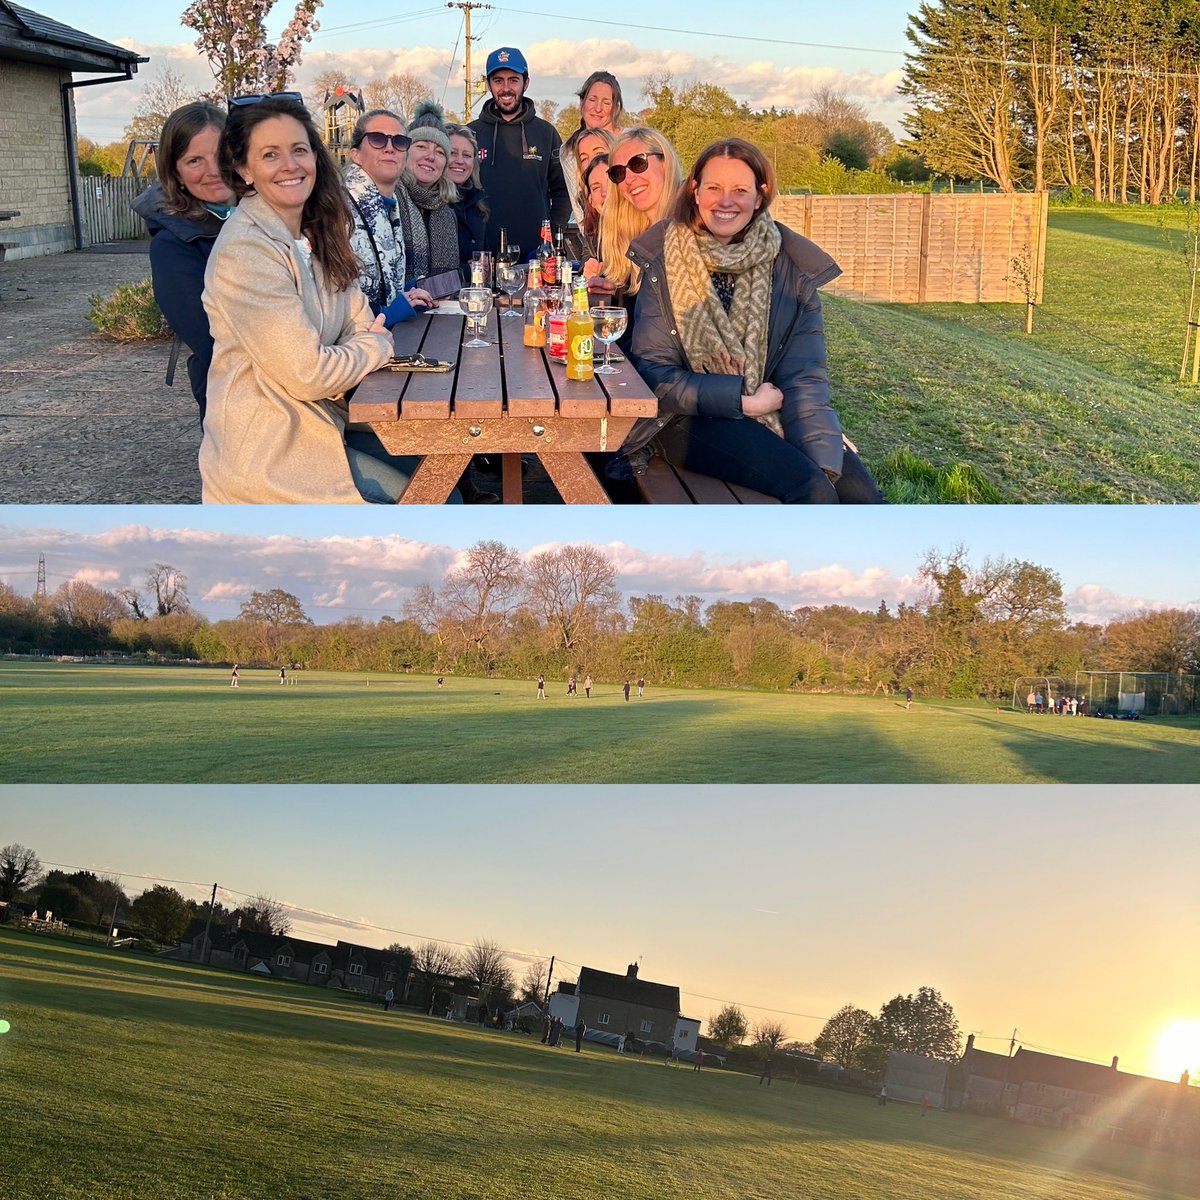 Fantastic first Friday night at the Club last week. U11s and U13s training in the sunshine and the Ladies team getting together for a social gathering before training starts next week. #sunshine #fridaynights #coaching #training #familycricketclub #biddestonecricketclub